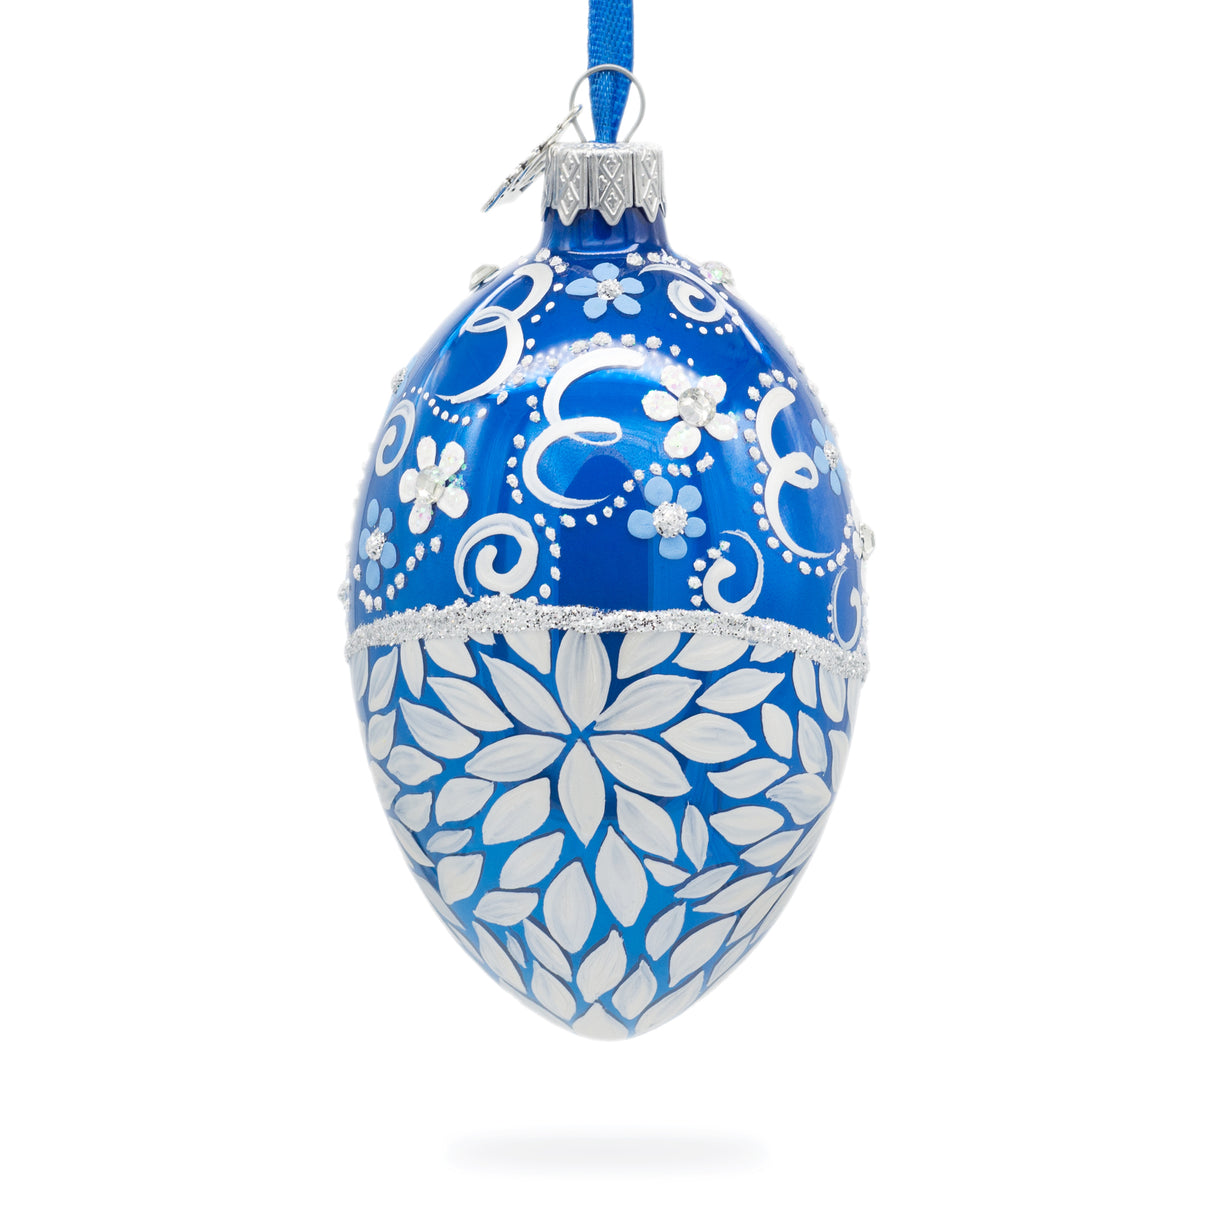 Glass White Pearled Flowers on Glossy Blue Glass Egg Ornament 4 Inches in Multi color Oval